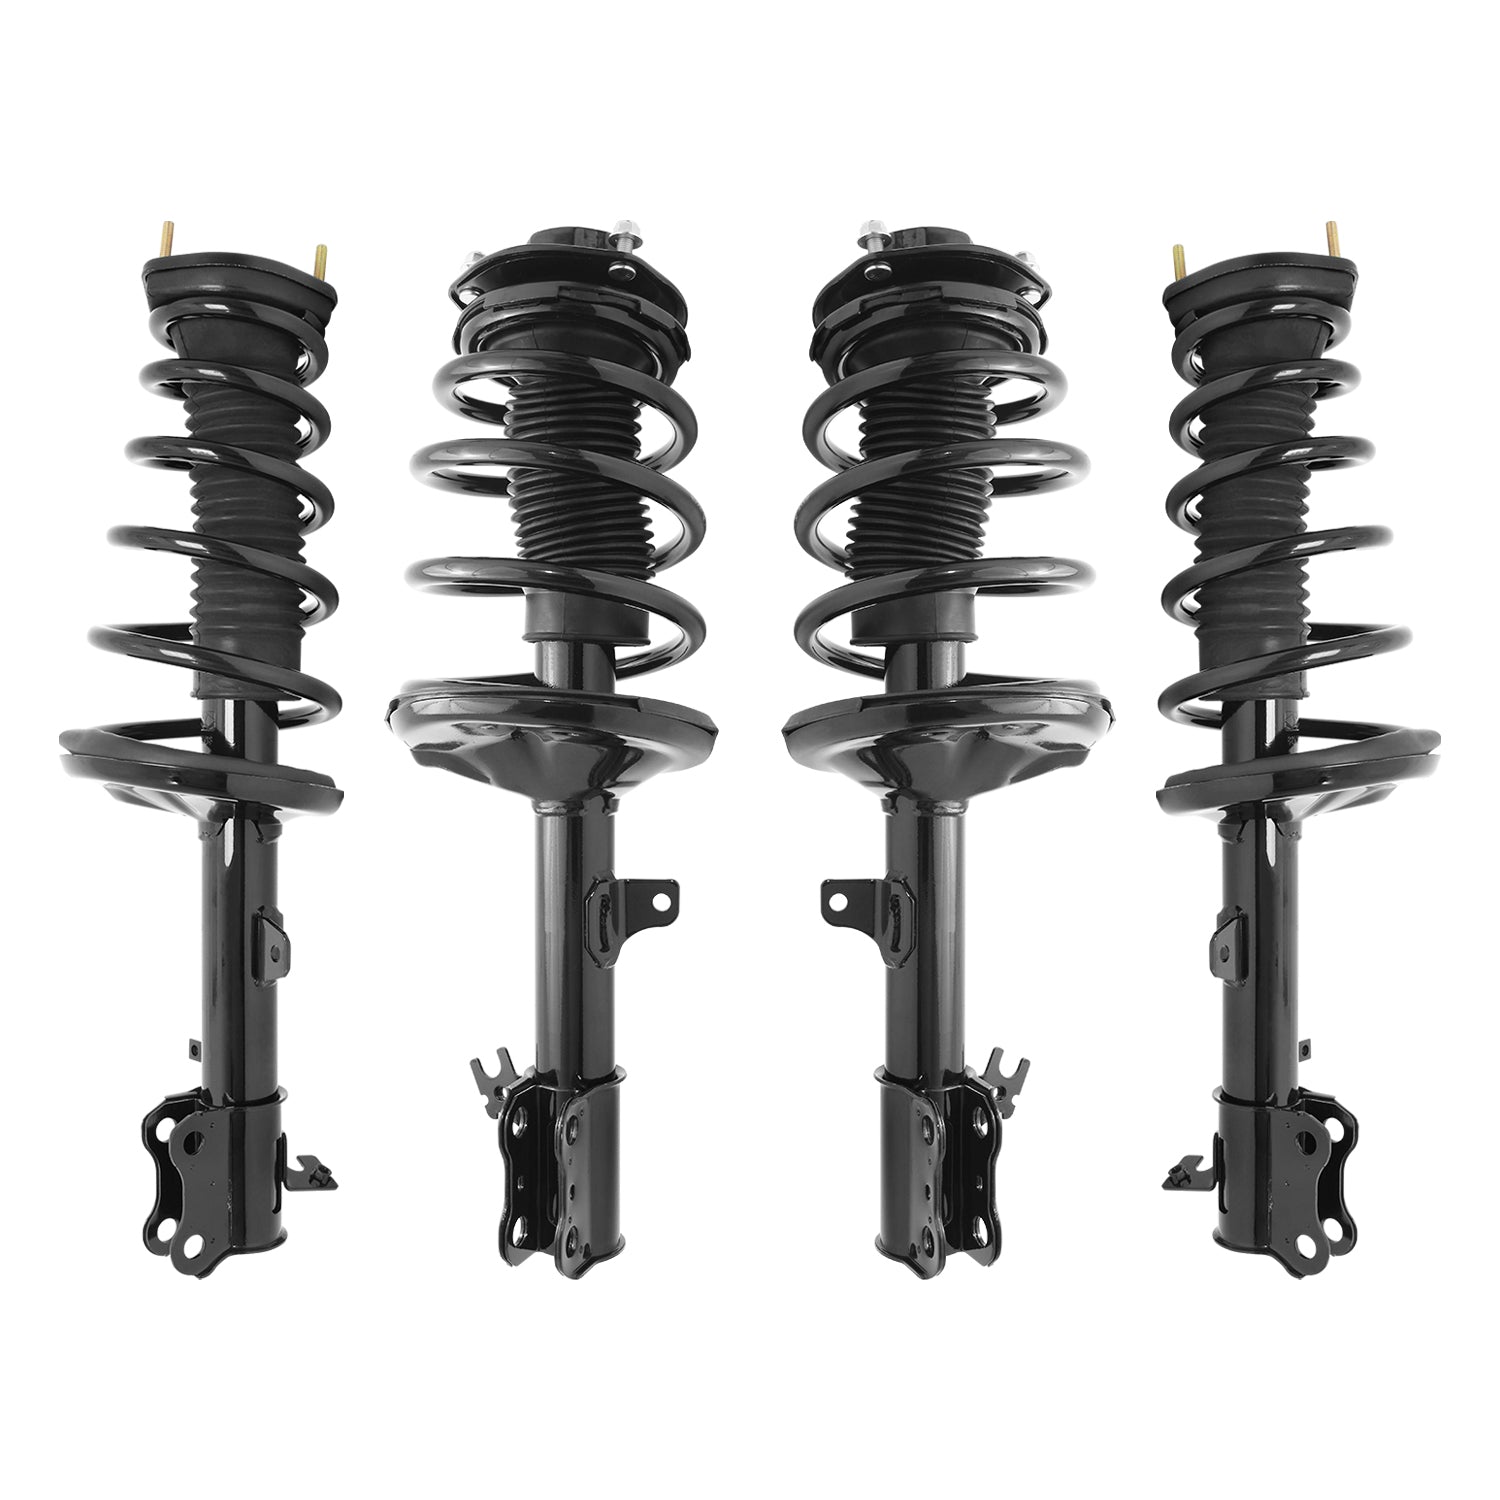 Unity 4-11477-15907-001 Front & Rear Complete Strut & Coil Spring Assemblies for 1999-2003 Lexus RX300 AWD V6 3.0L